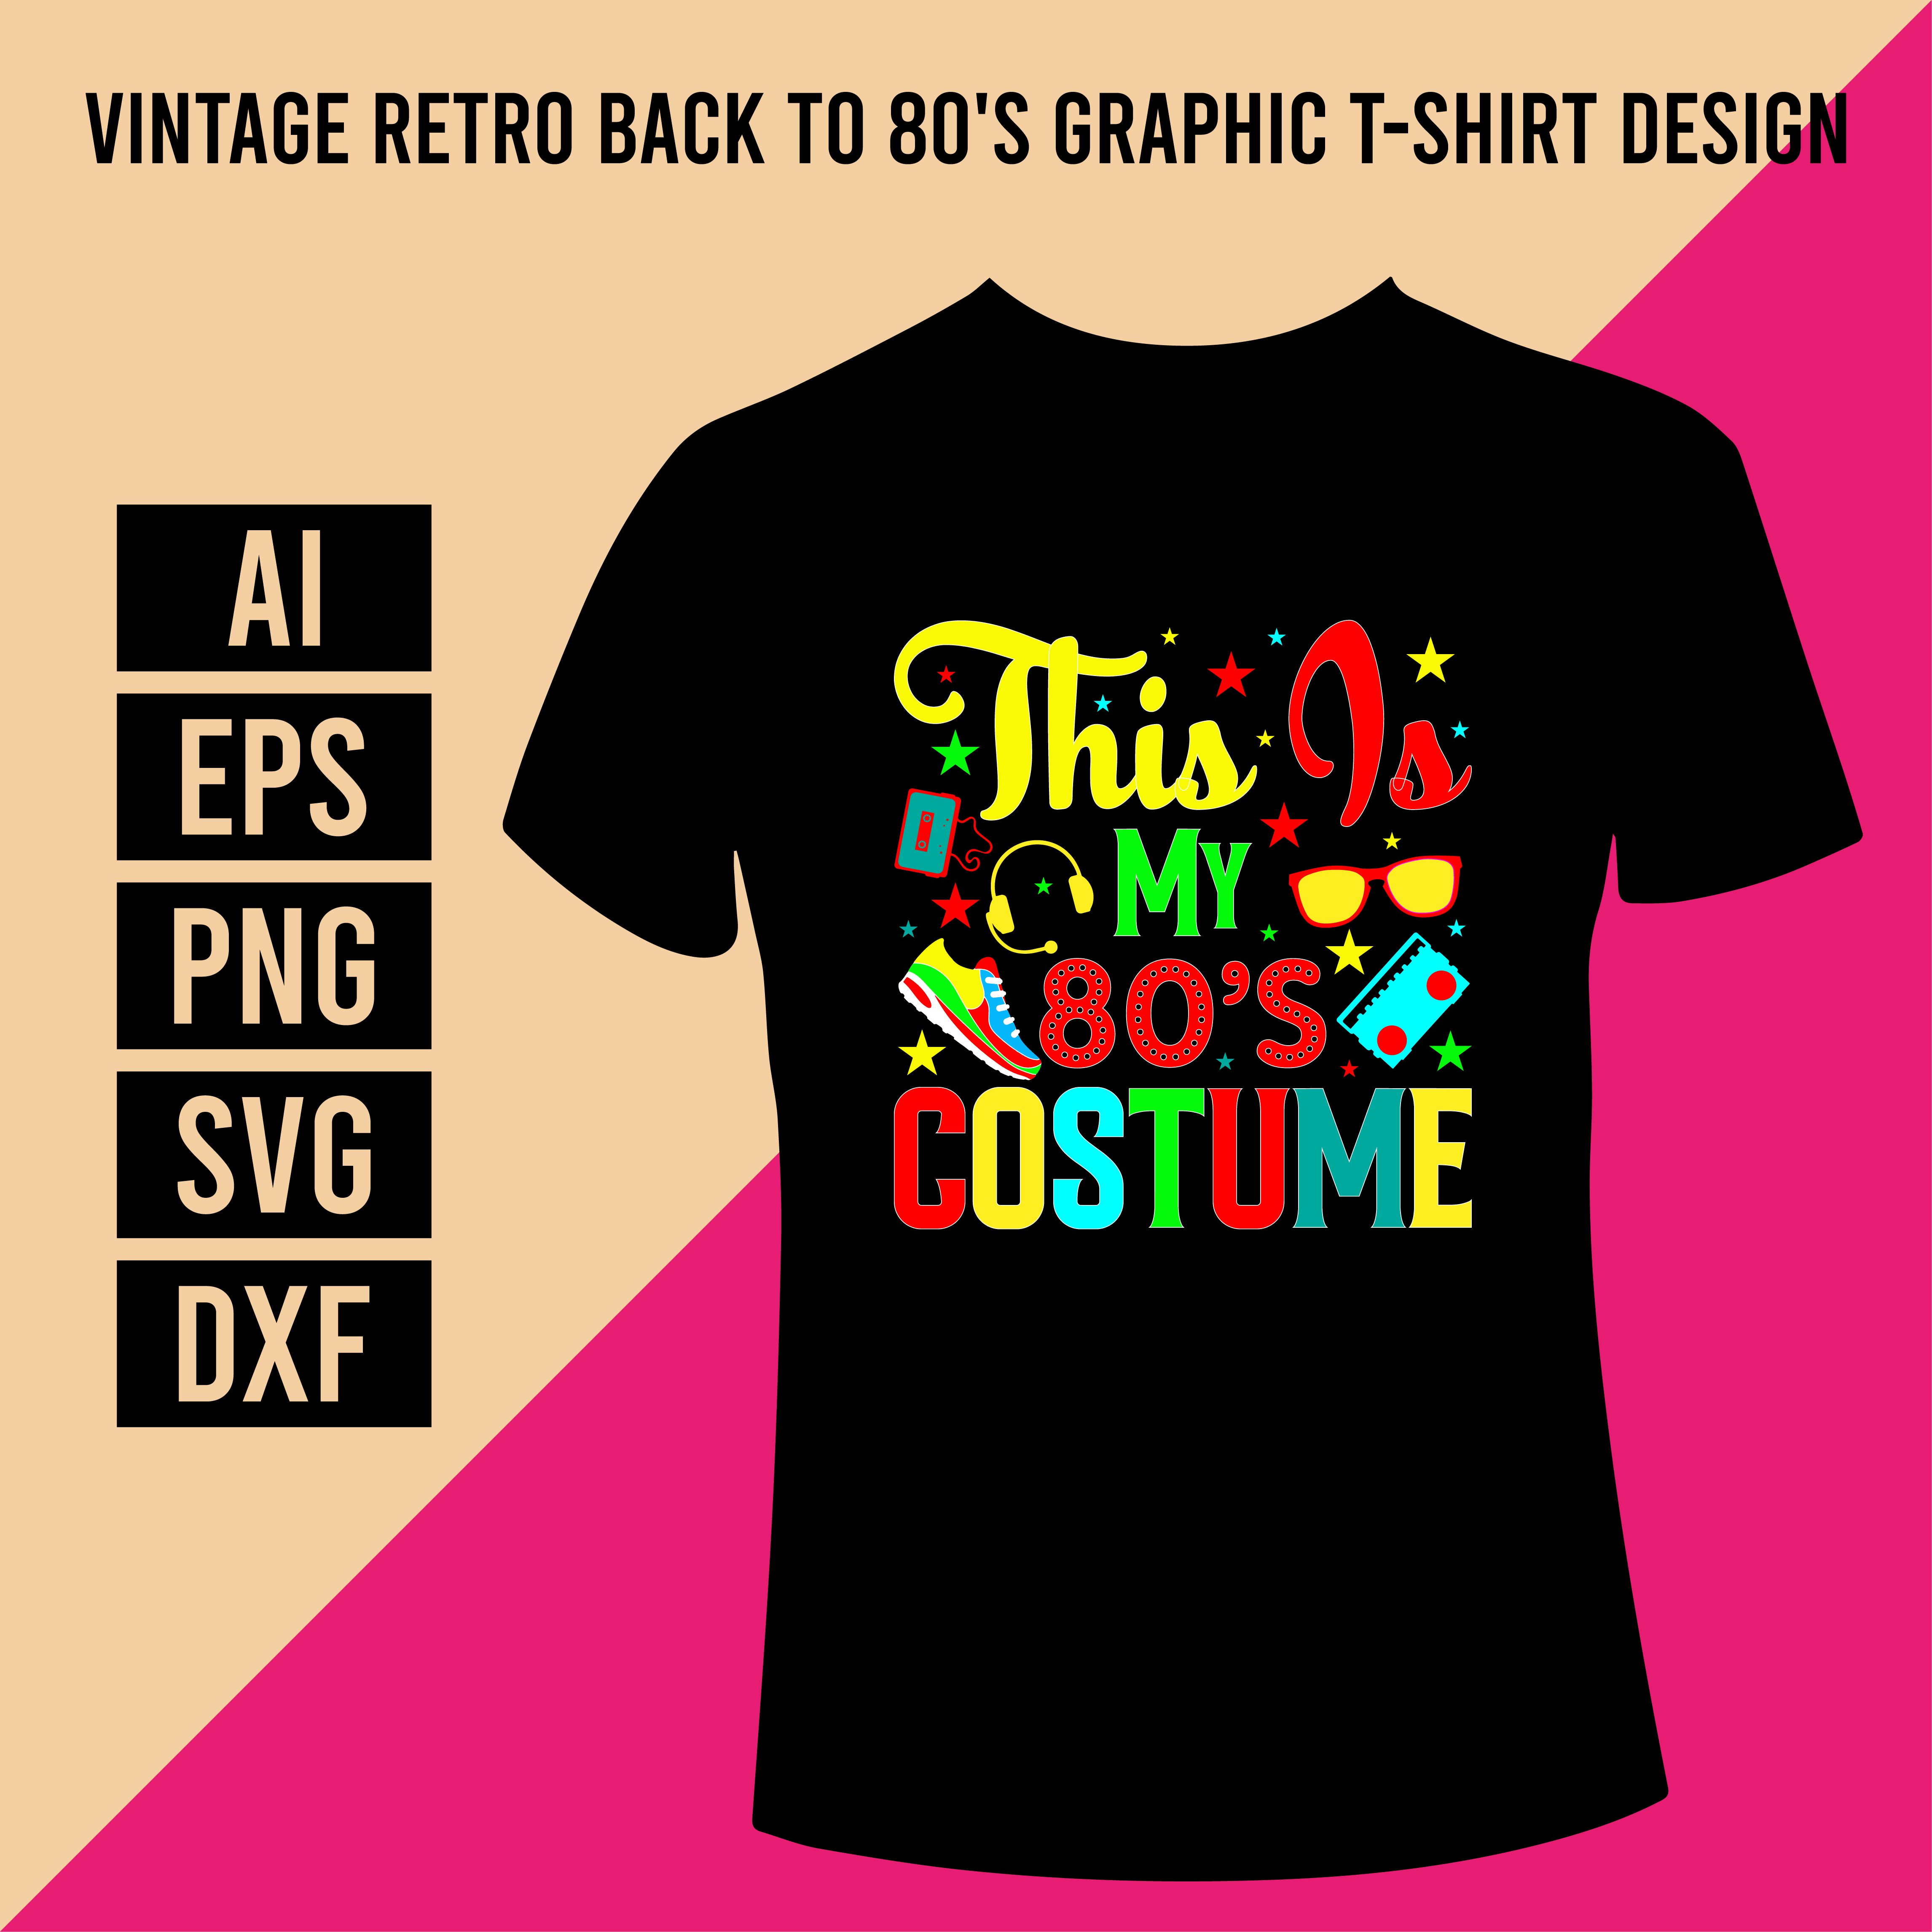 Vintage Retro Back To 80's Graphic T-Shirt Design cover image.